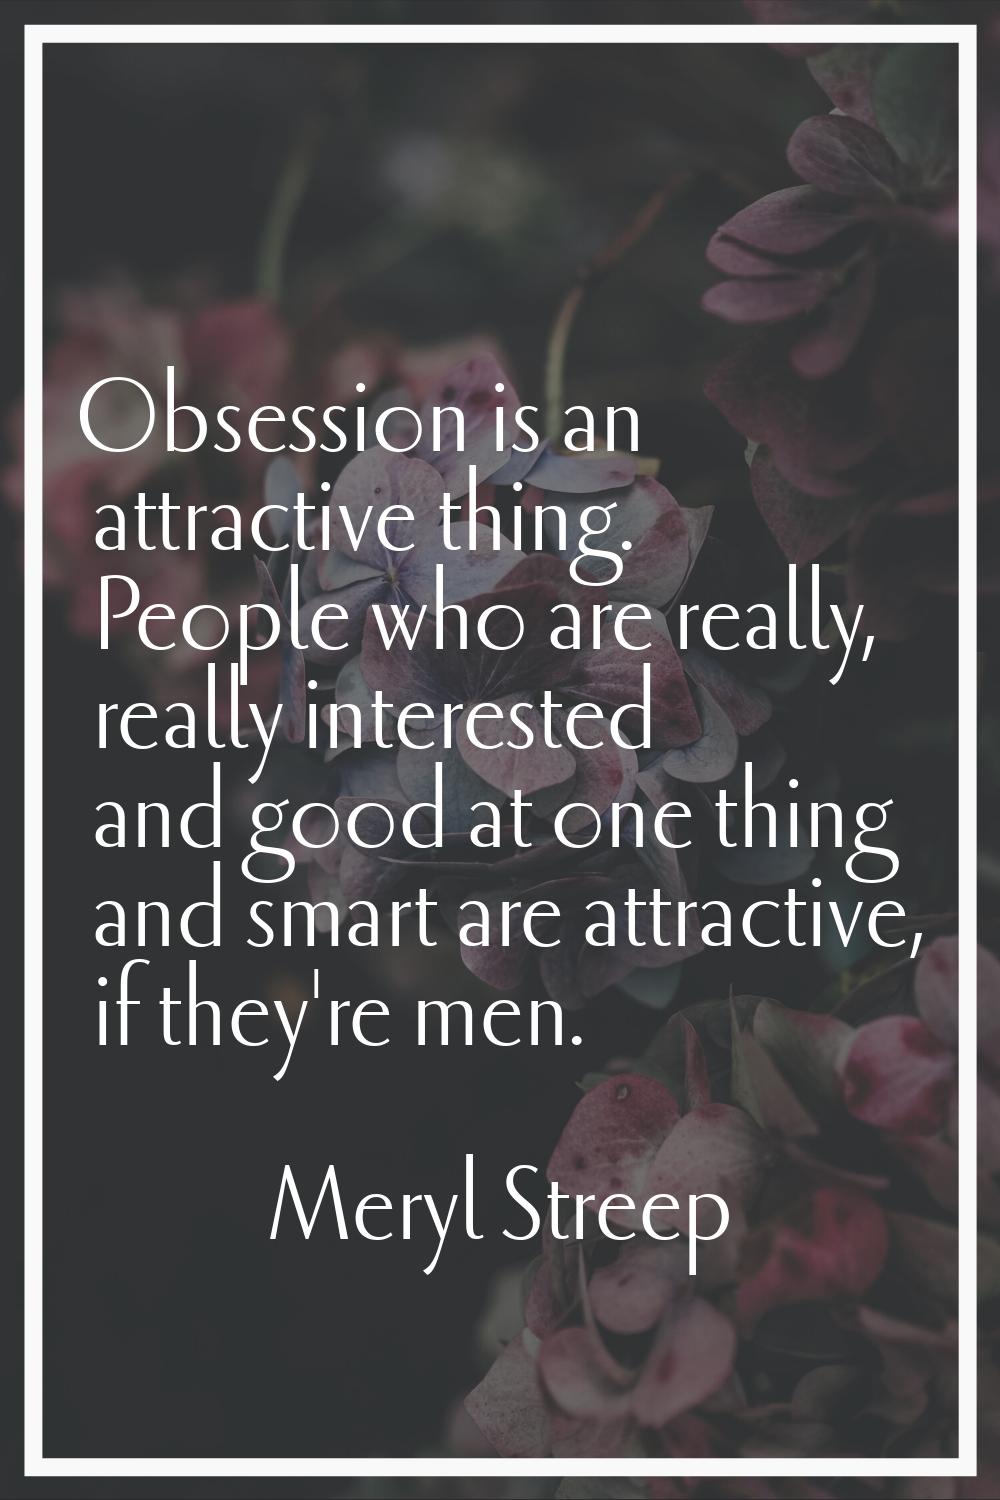 Obsession is an attractive thing. People who are really, really interested and good at one thing an